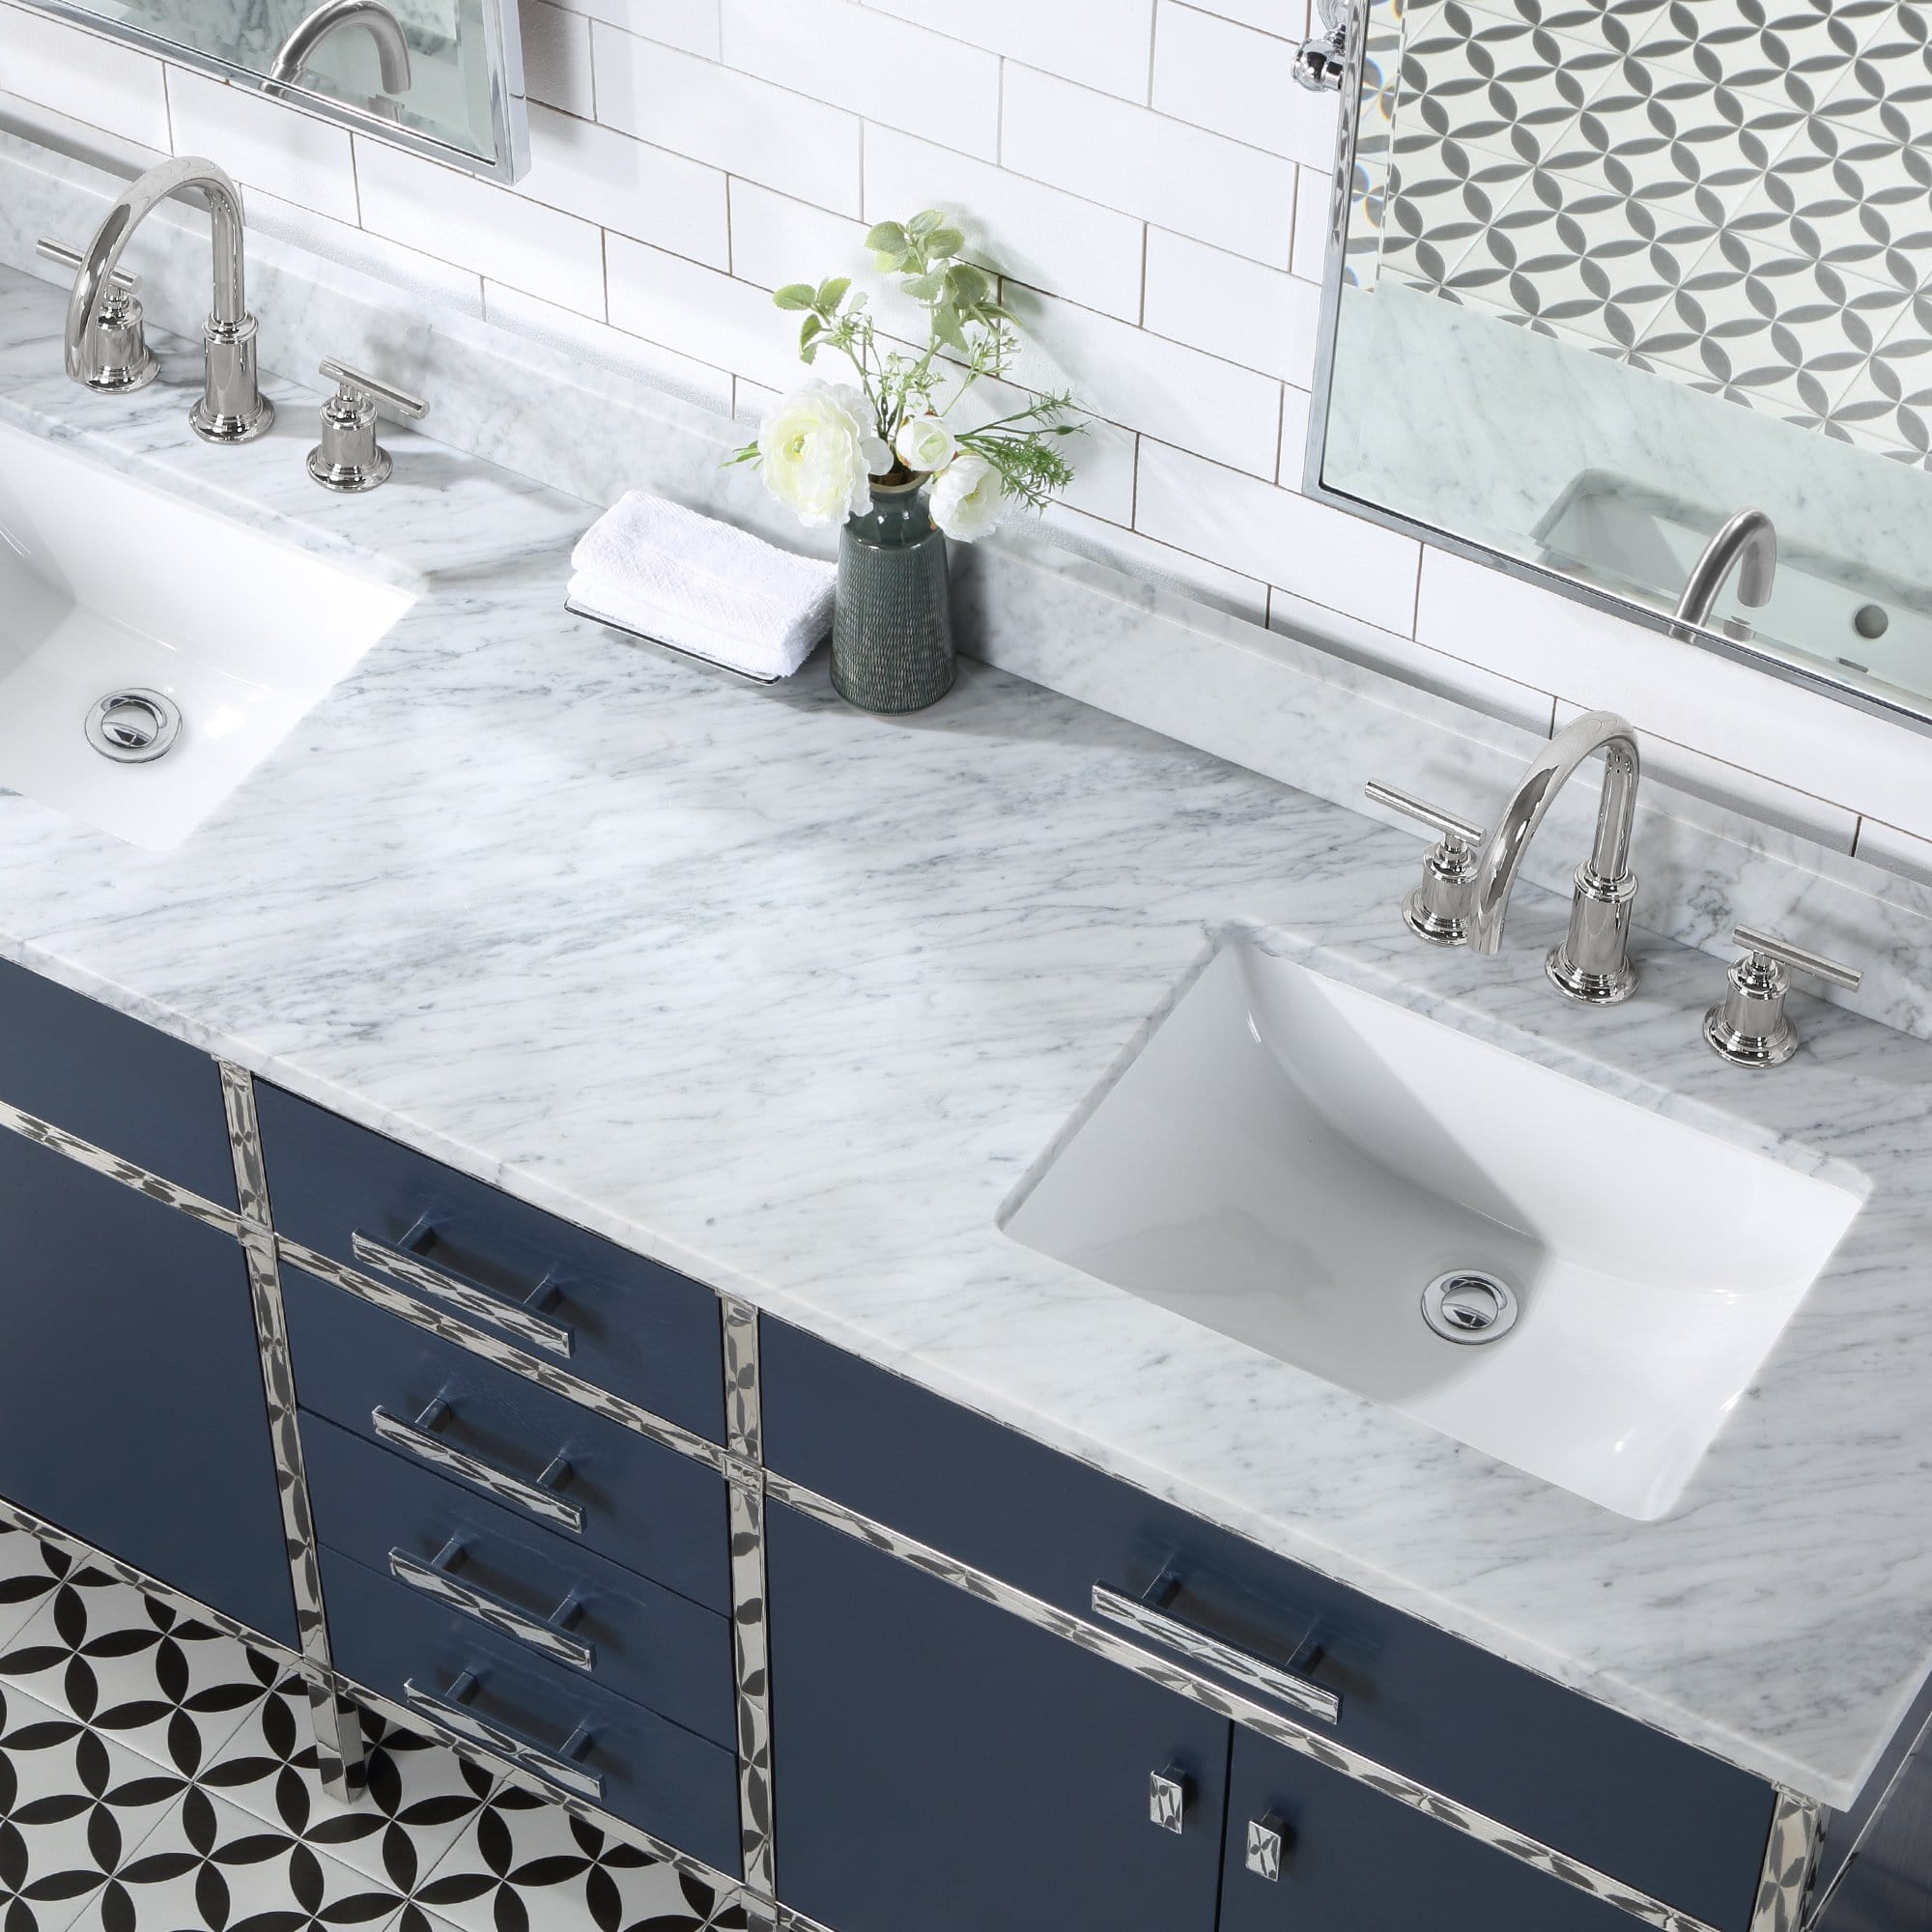 Water Creation Marquis 72 In. Double Sink Carrara White Marble Countertop Vanity in Monarch Blue with Mirrors - Molaix732030765979Bathroom vanityMQ72CW01MB-E18000000